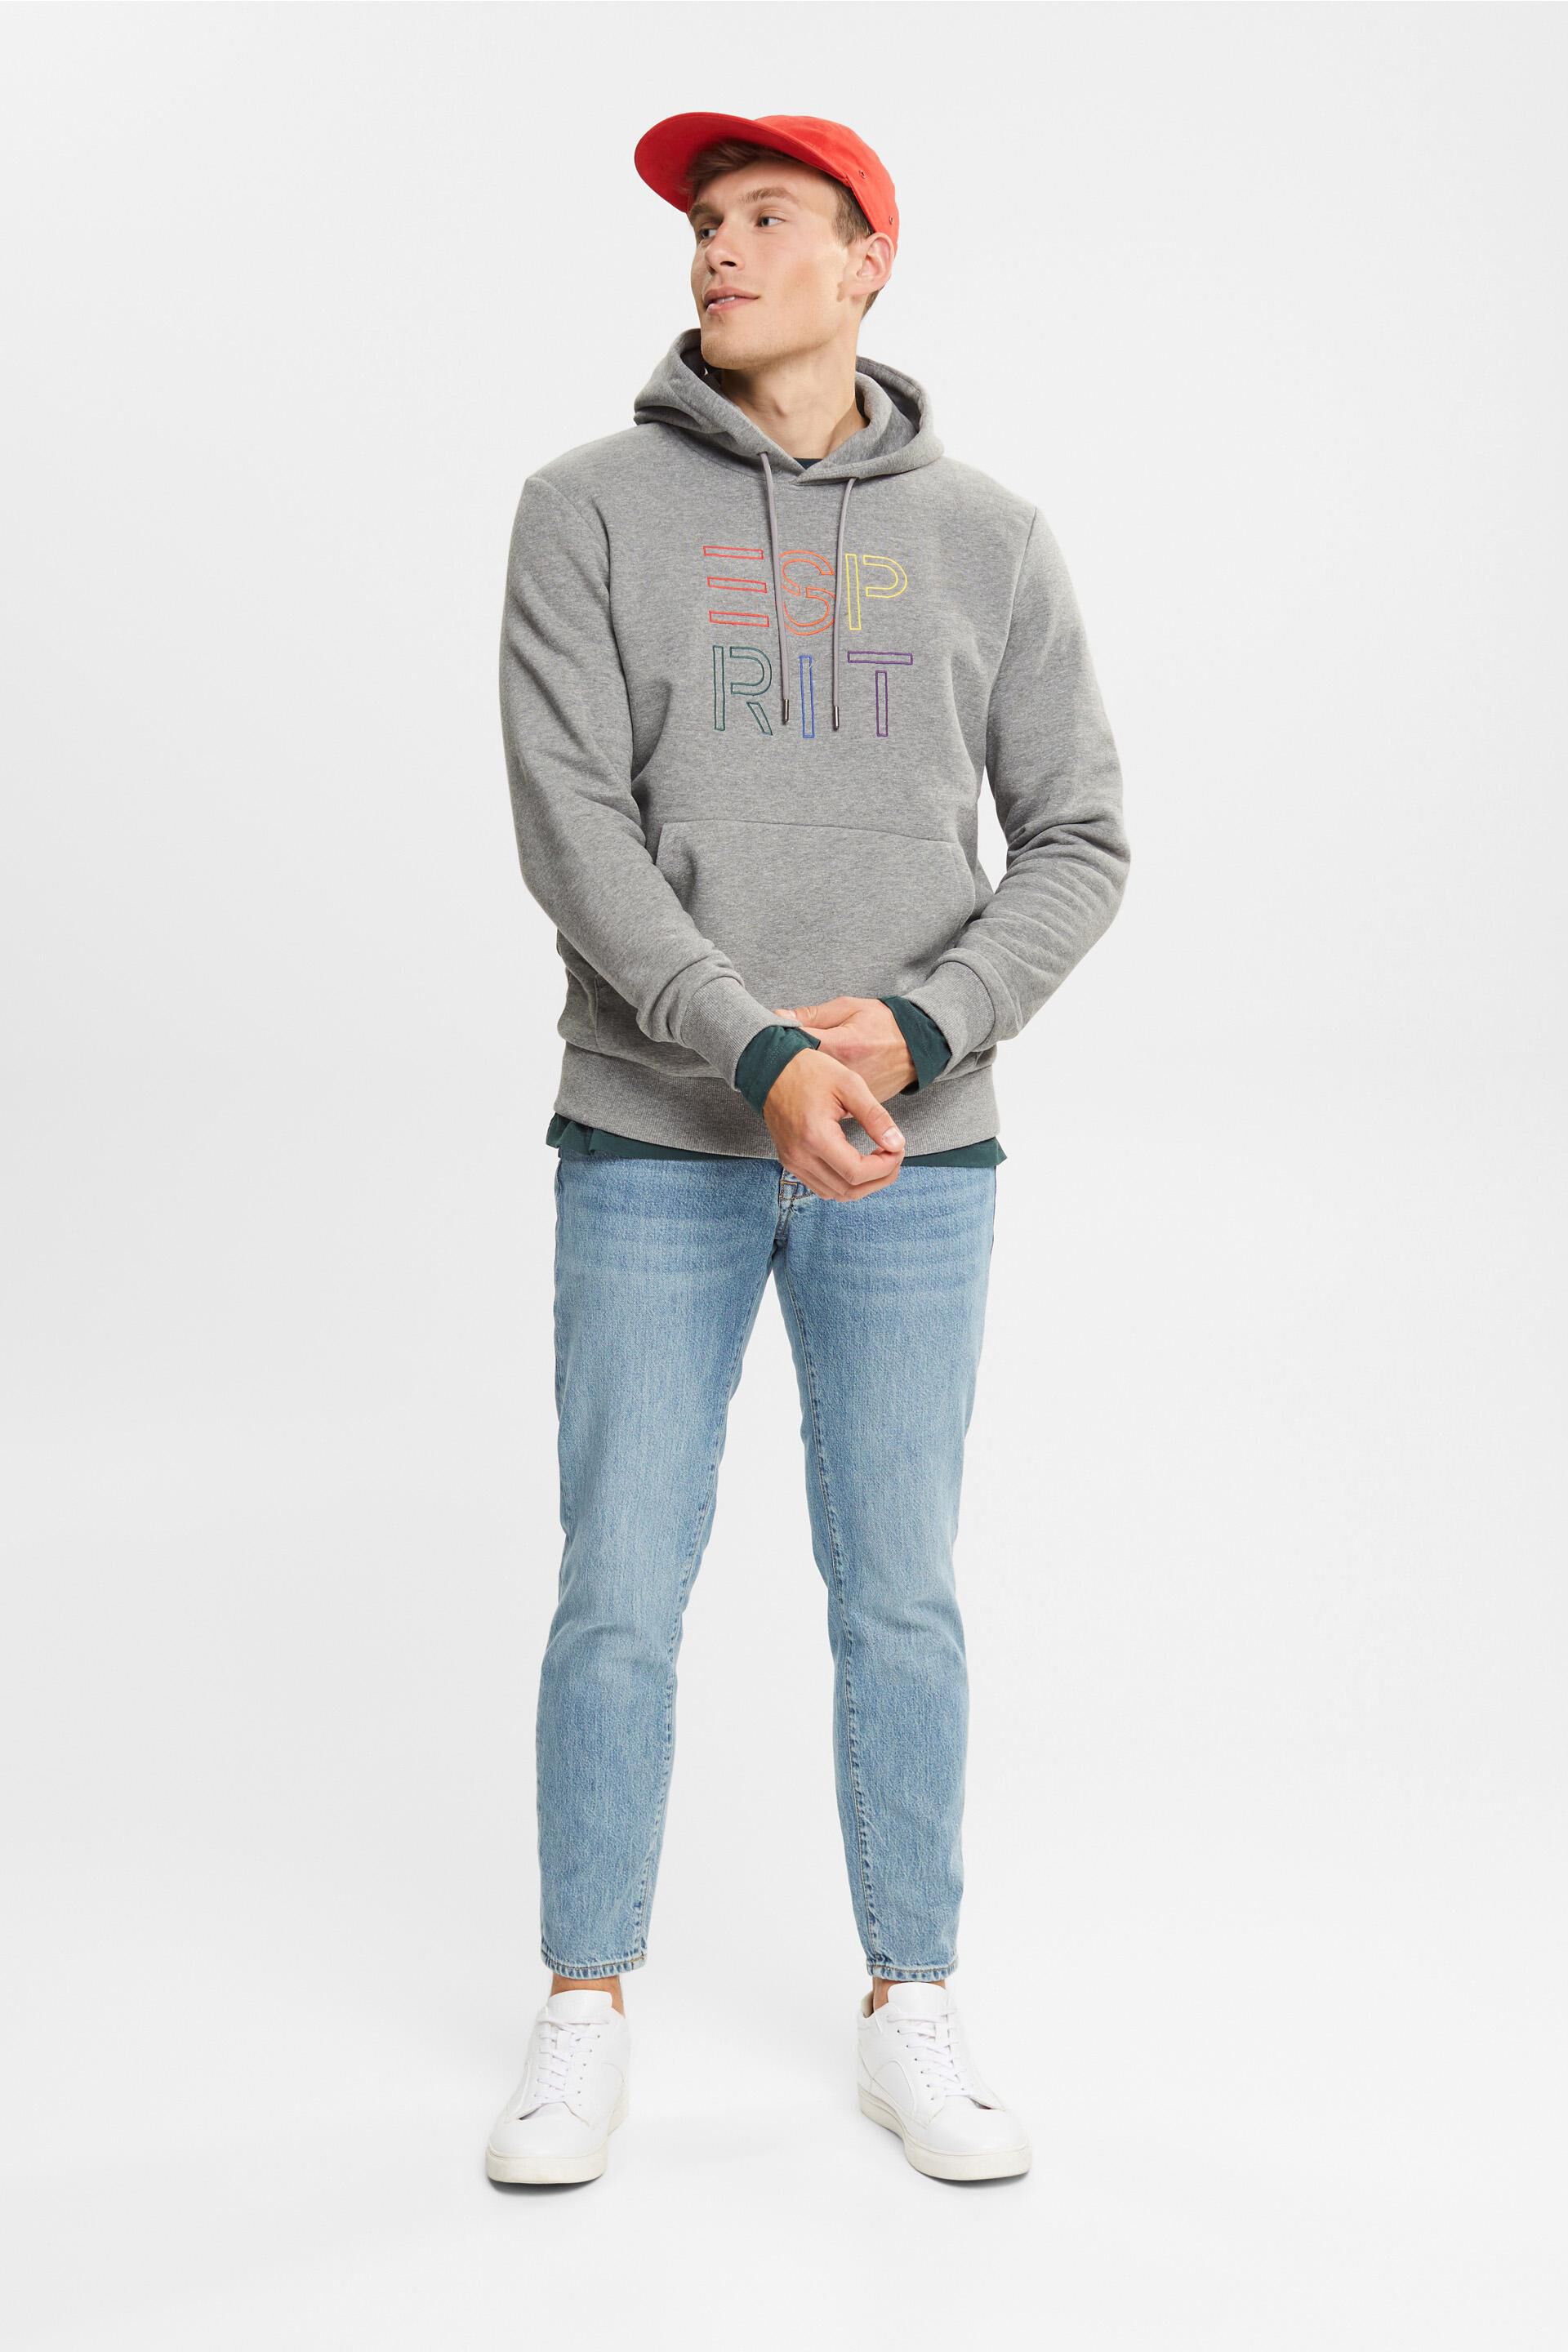 Esprit logo Hoodie embroidered with